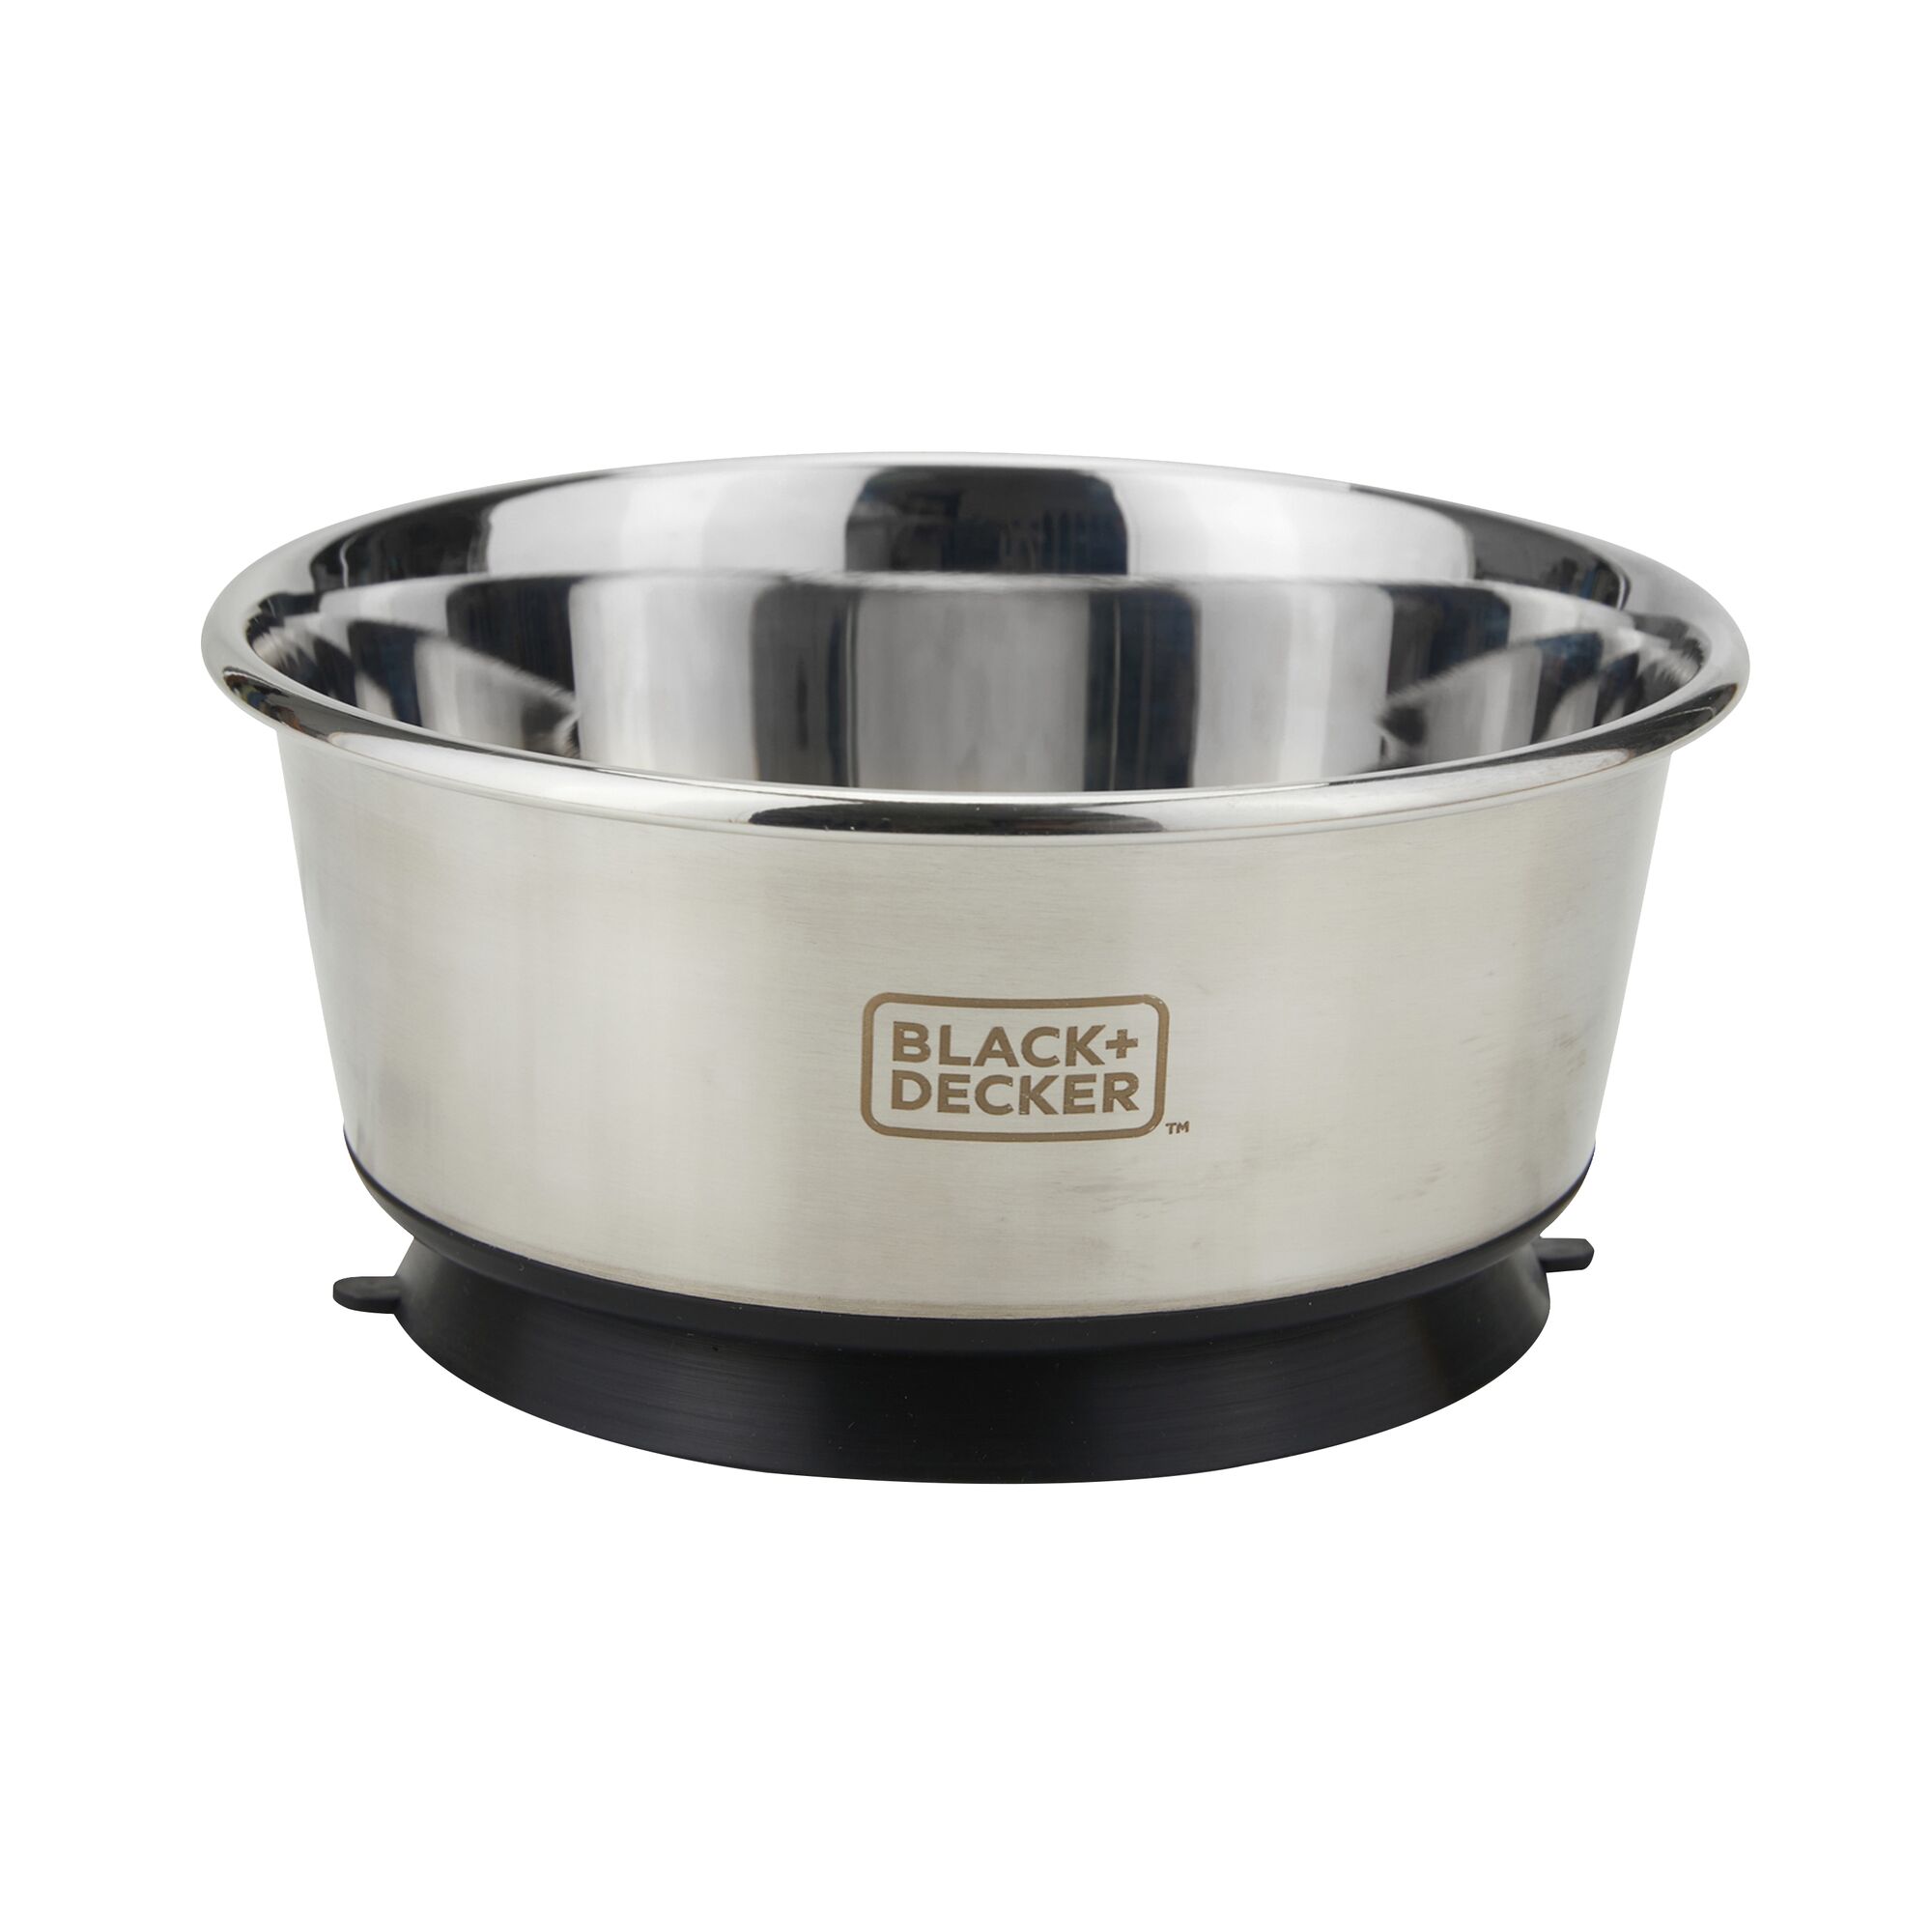 Hero image of the stainless-steel suction cup dog feeding bowl